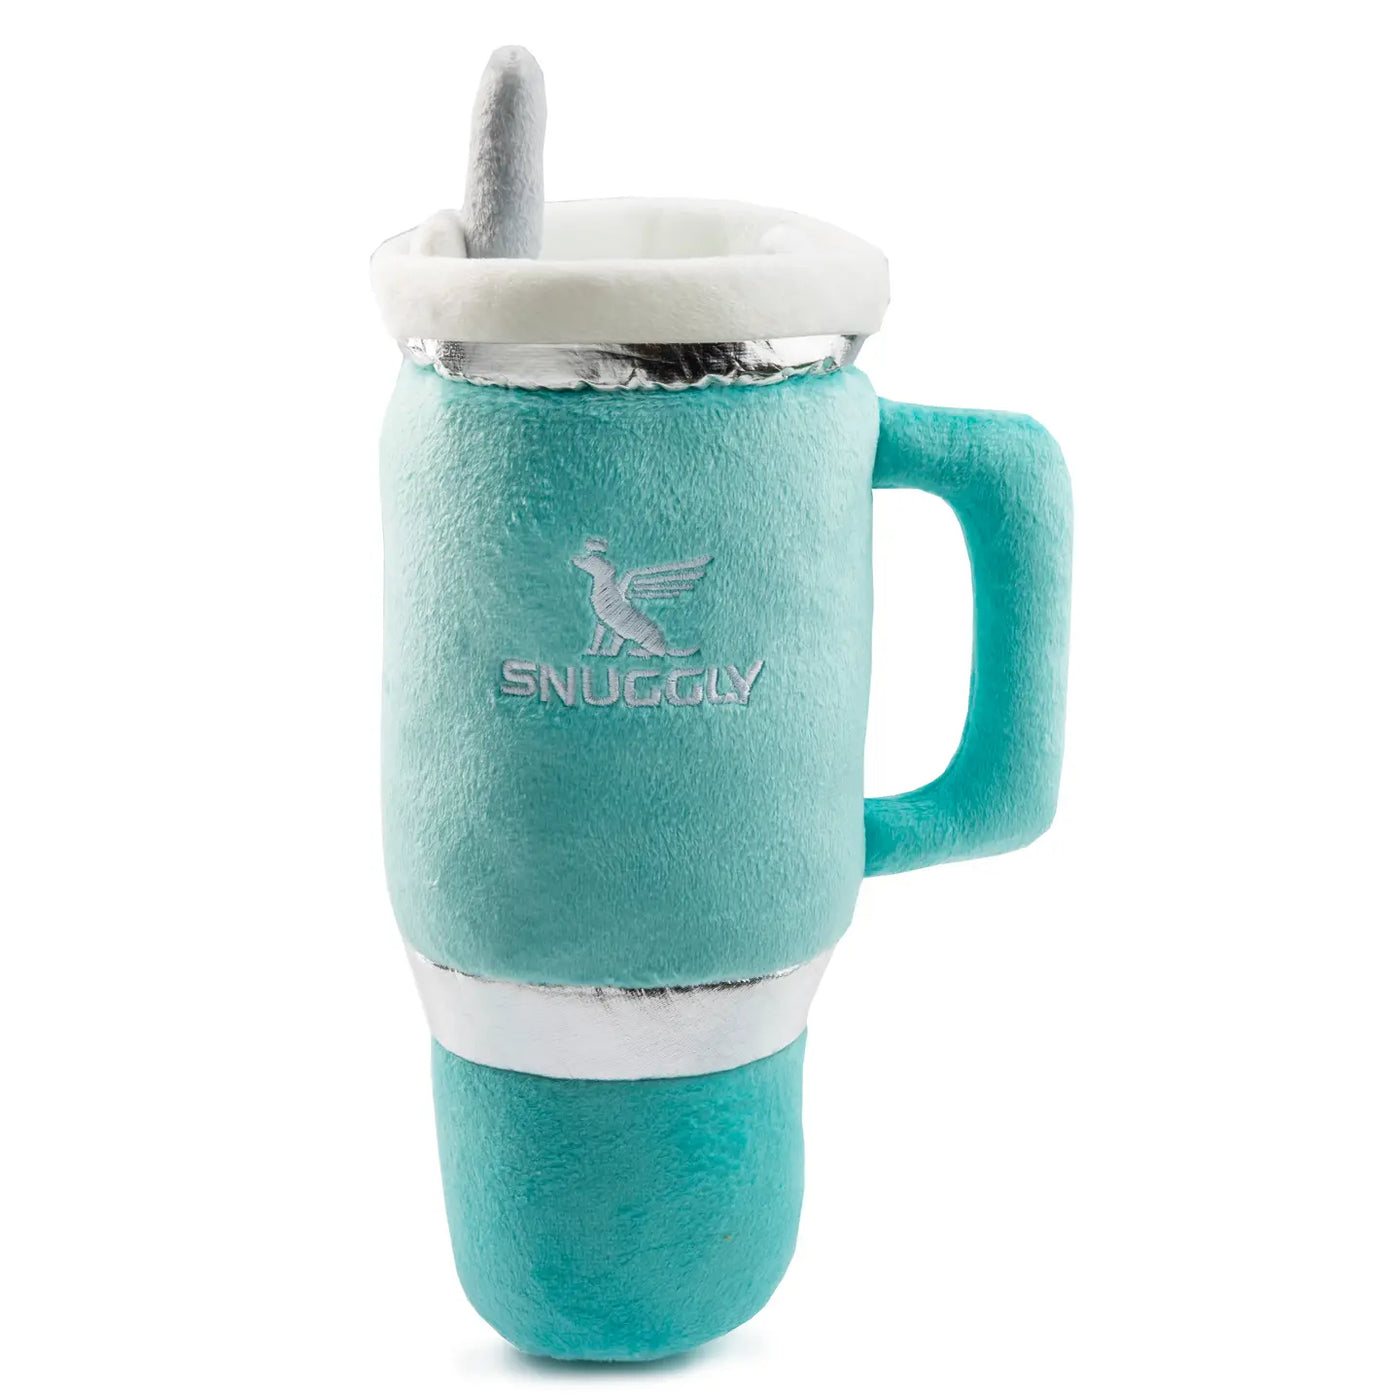 Snuggly Cup - Teal Squeaker Dog Toy